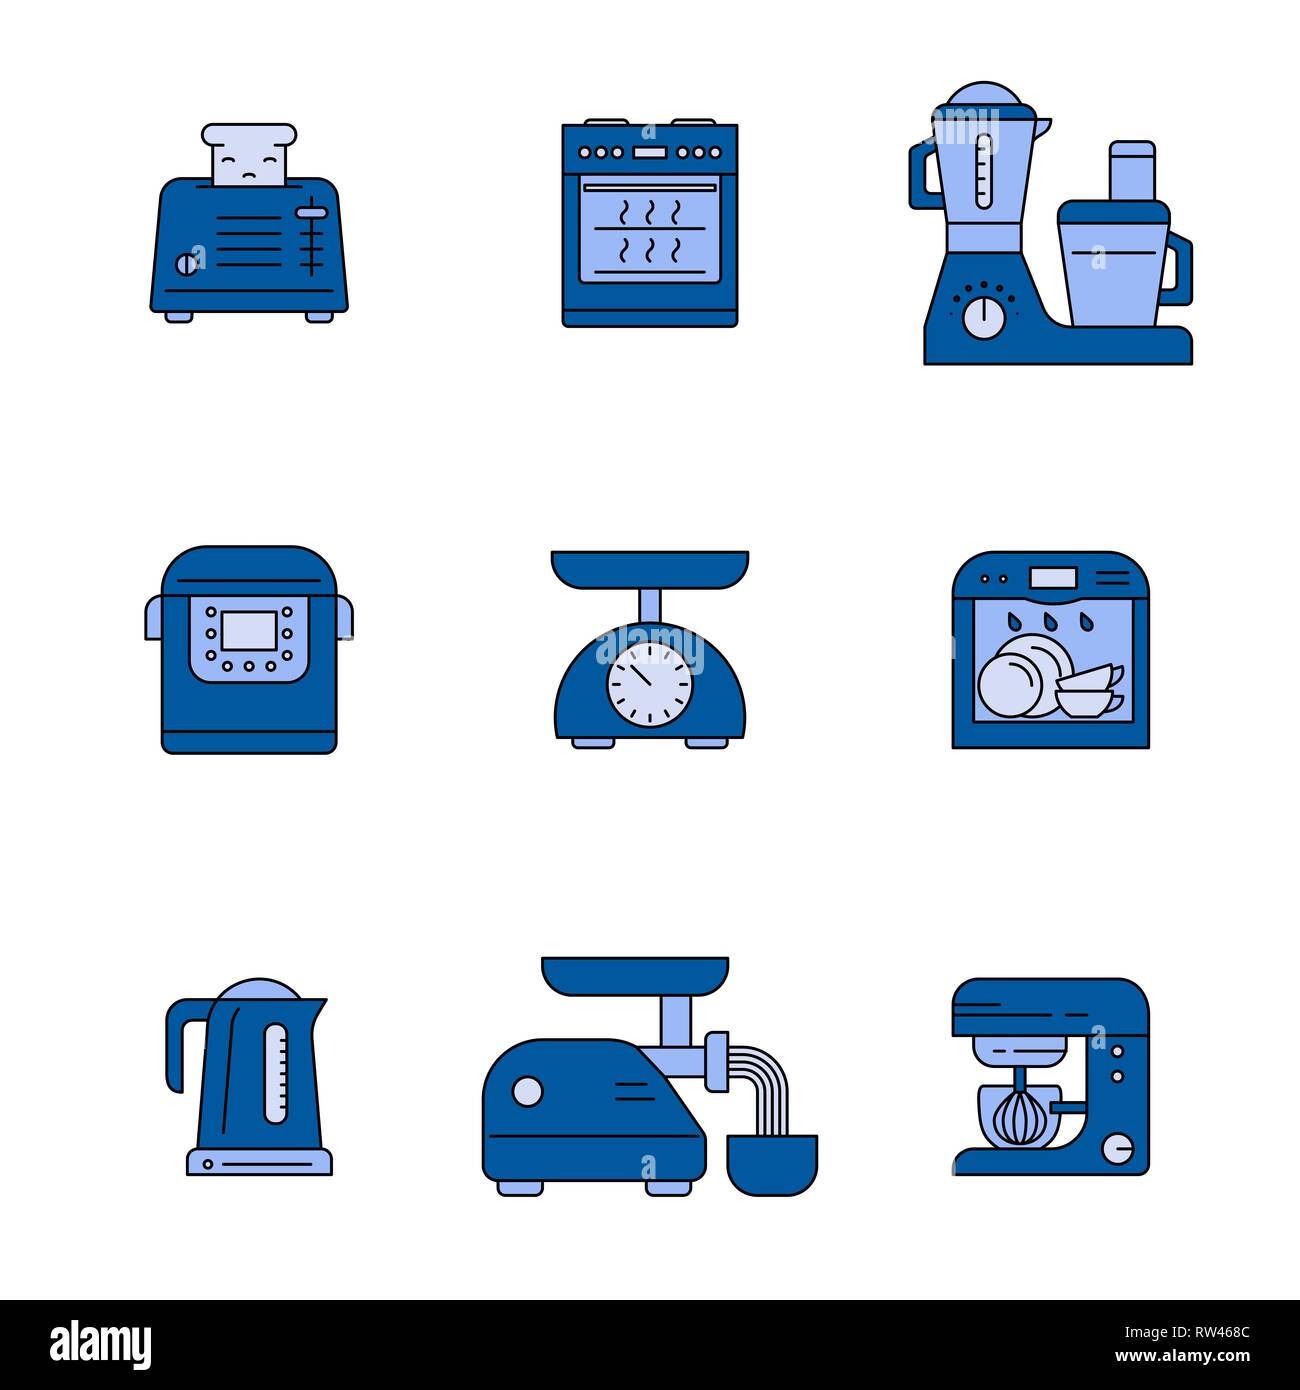 Kitchen utensils and household appliances icons Stock Vector